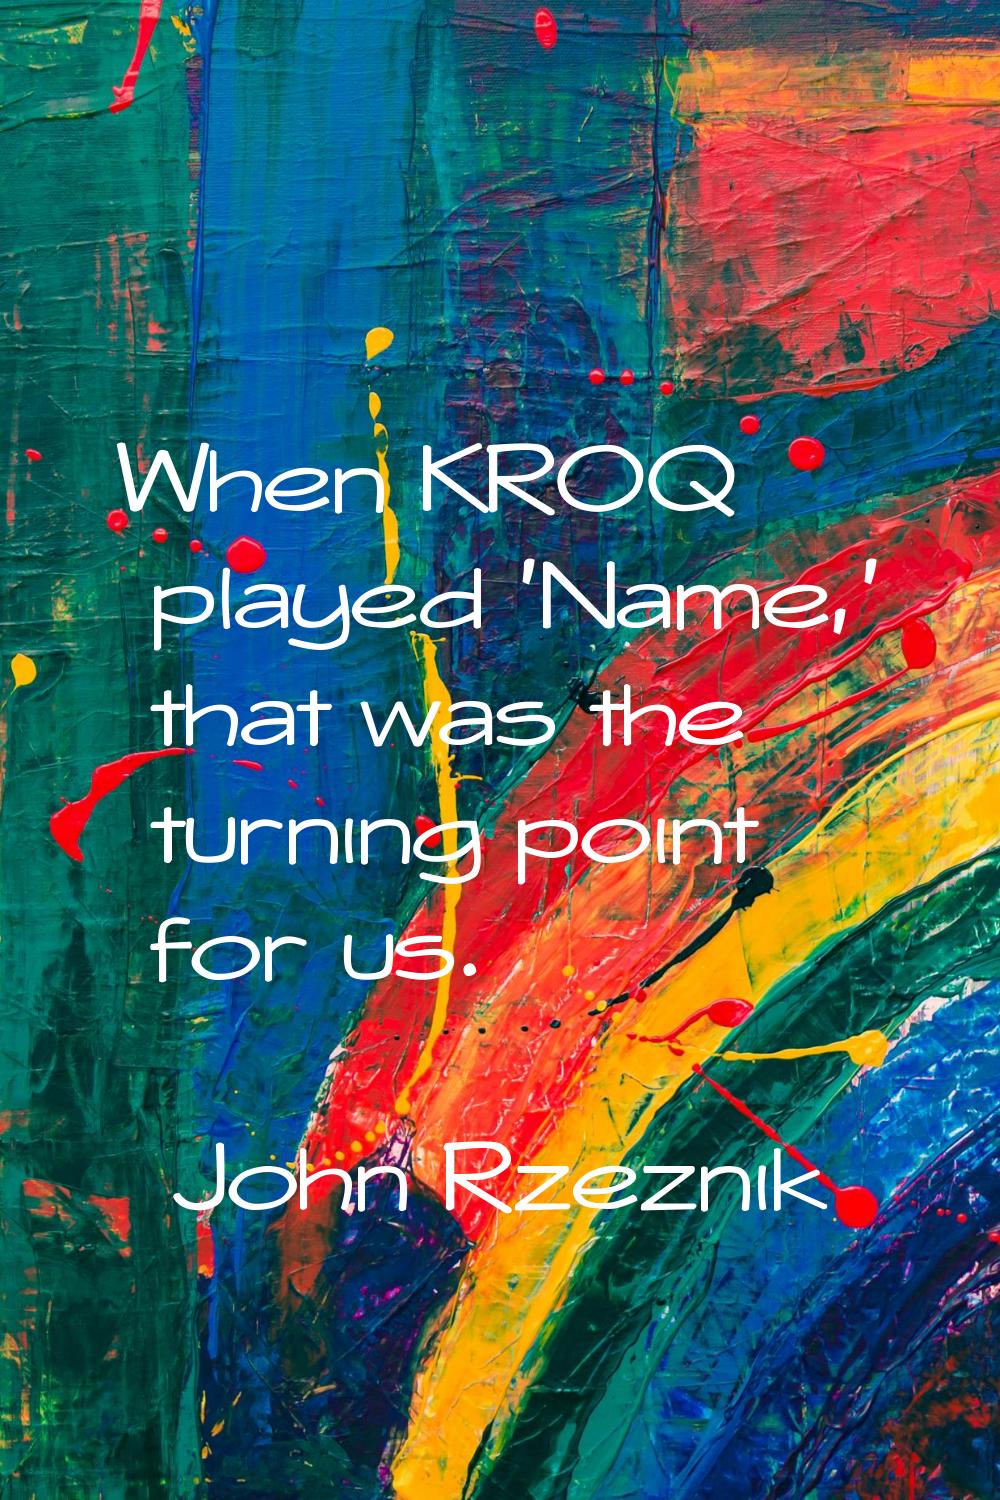 When KROQ played 'Name,' that was the turning point for us.